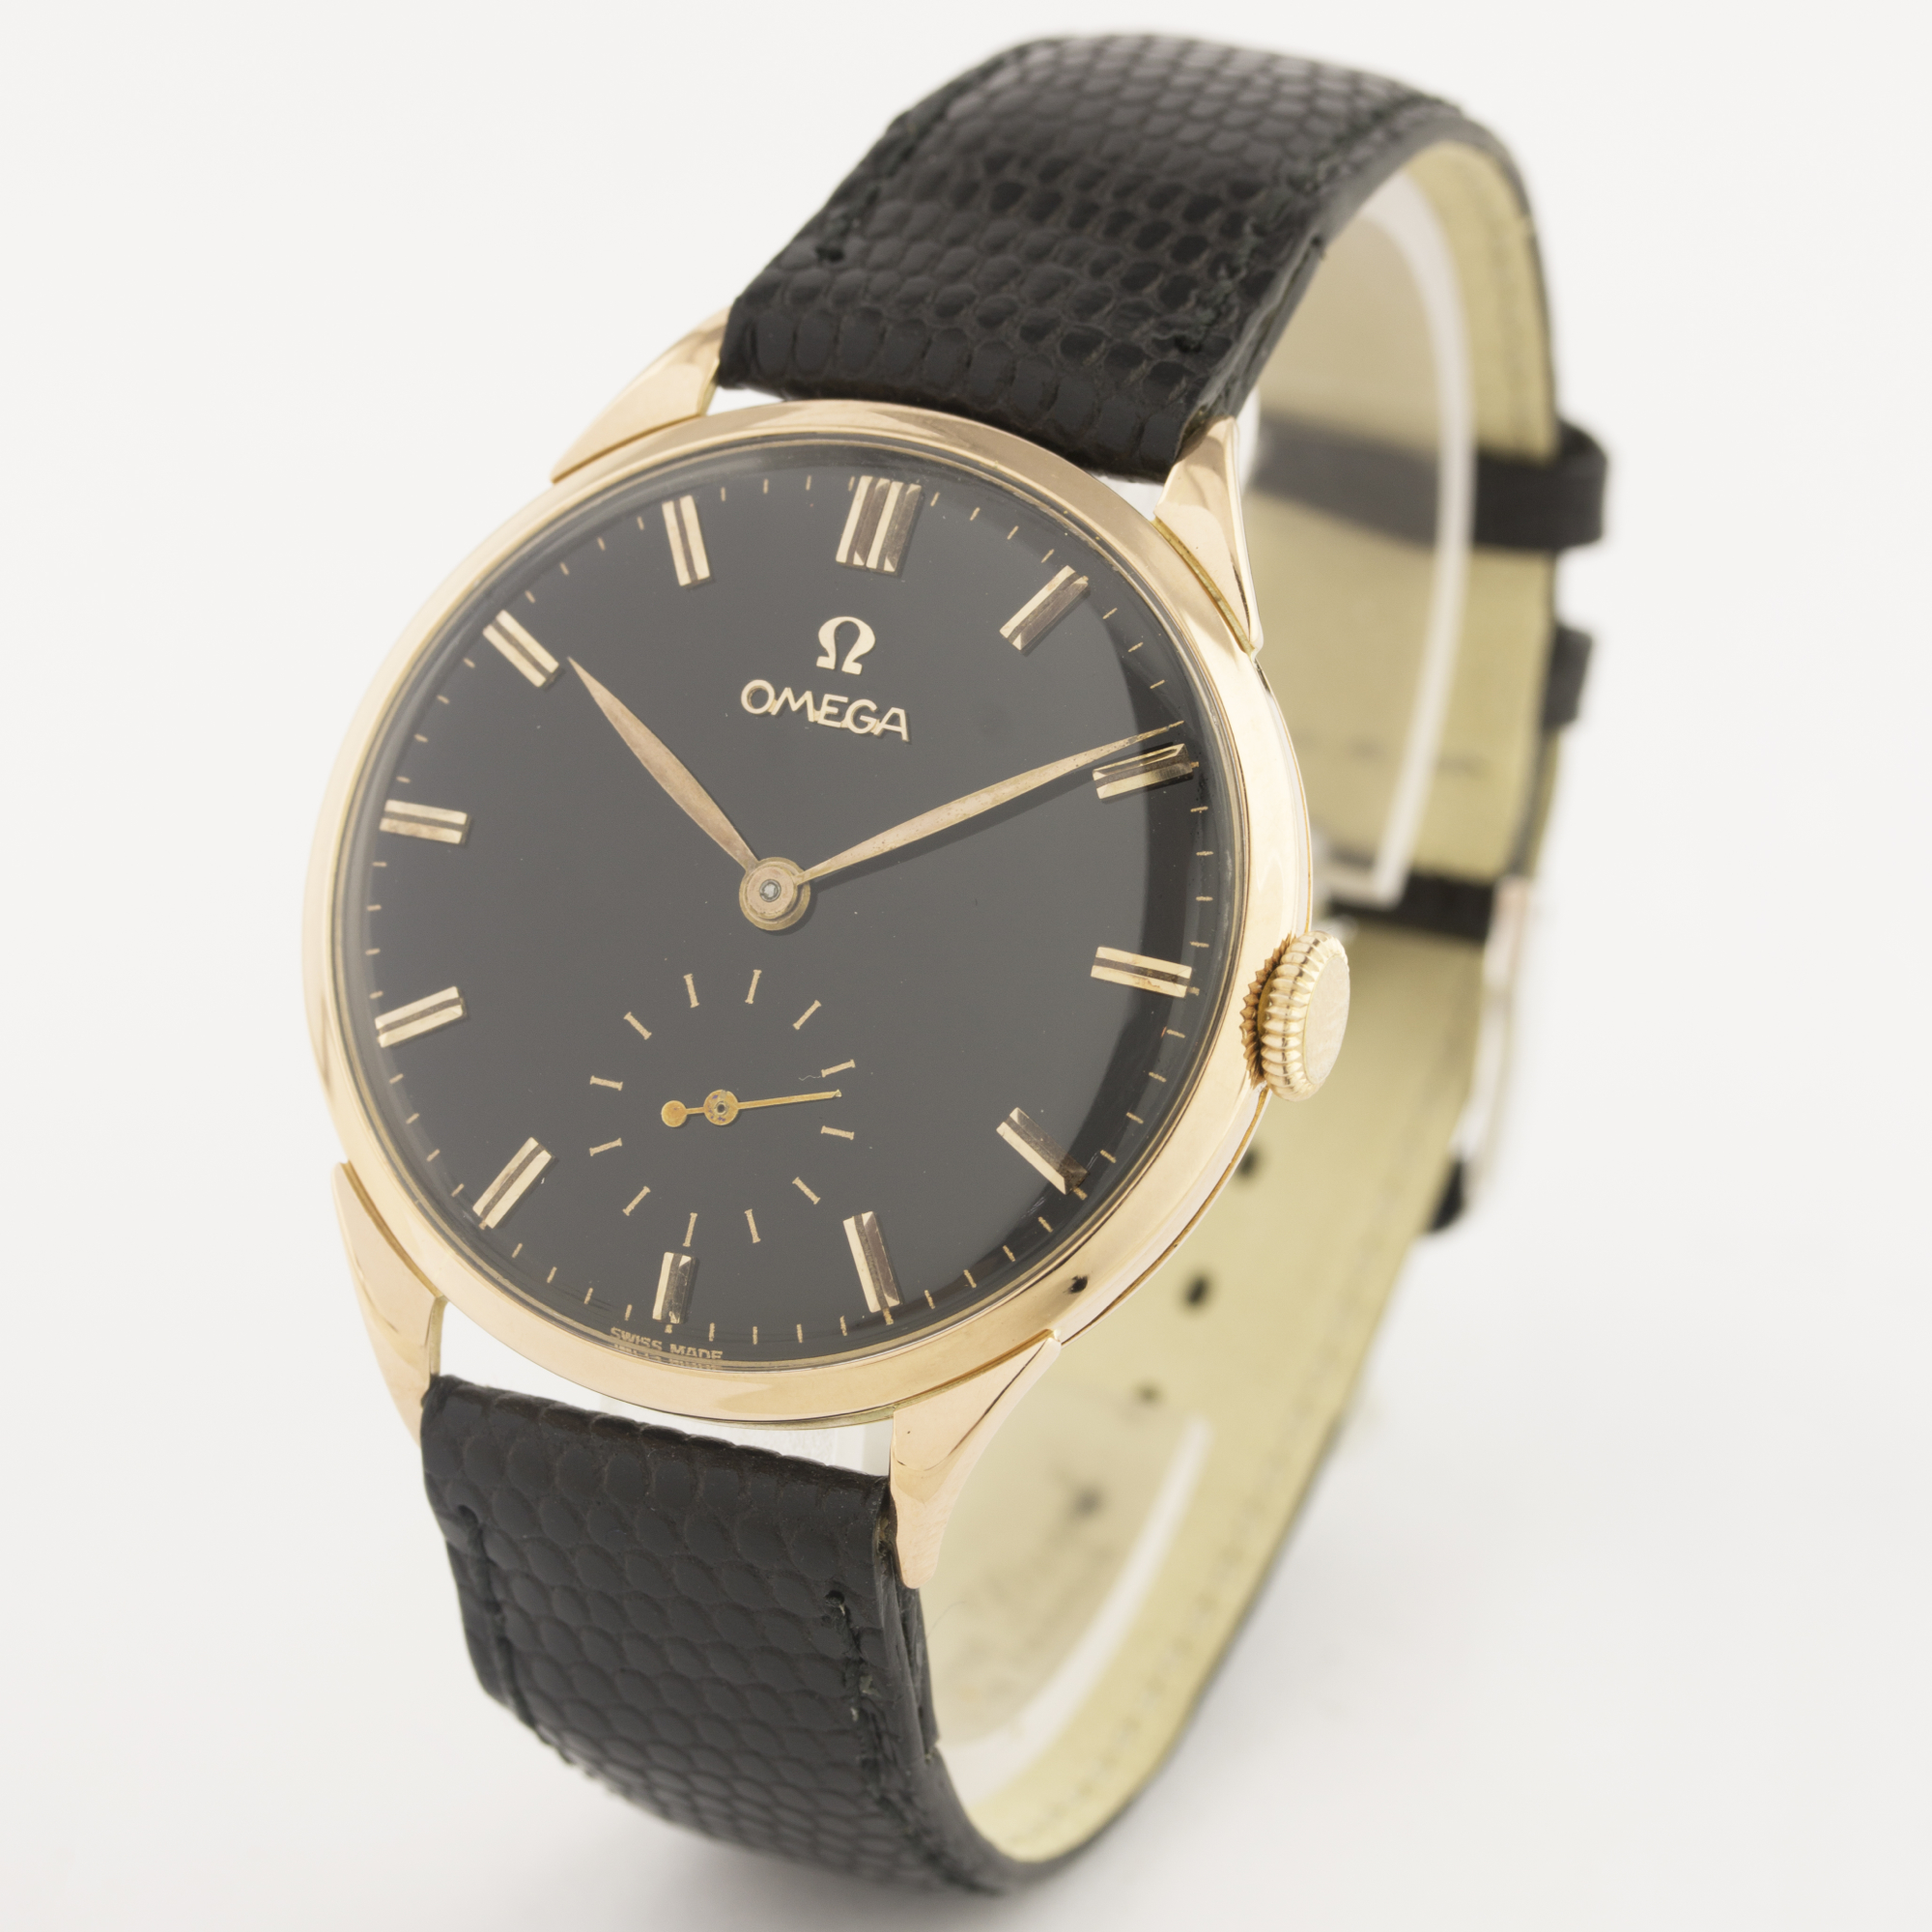 A GENTLEMAN'S LARGE SIZE 18K SOLID PINK GOLD OMEGA WRIST WATCH CIRCA 1950s, REF. 2619 D: Gloss black - Image 3 of 7